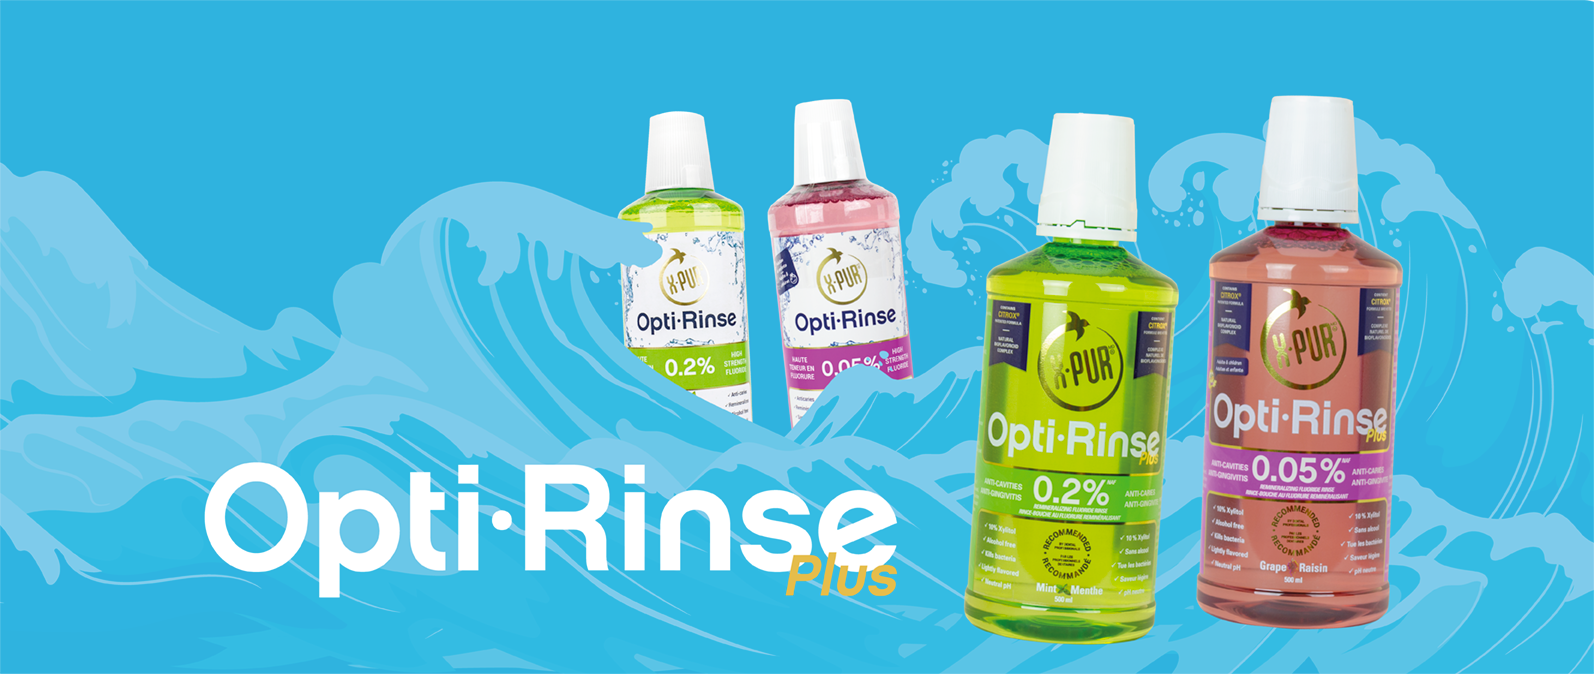 Oral Science Launches X-PUR Opti-Rinse with Citrox®, a New & Enhanced Version of its Flagship Oral Rinse!